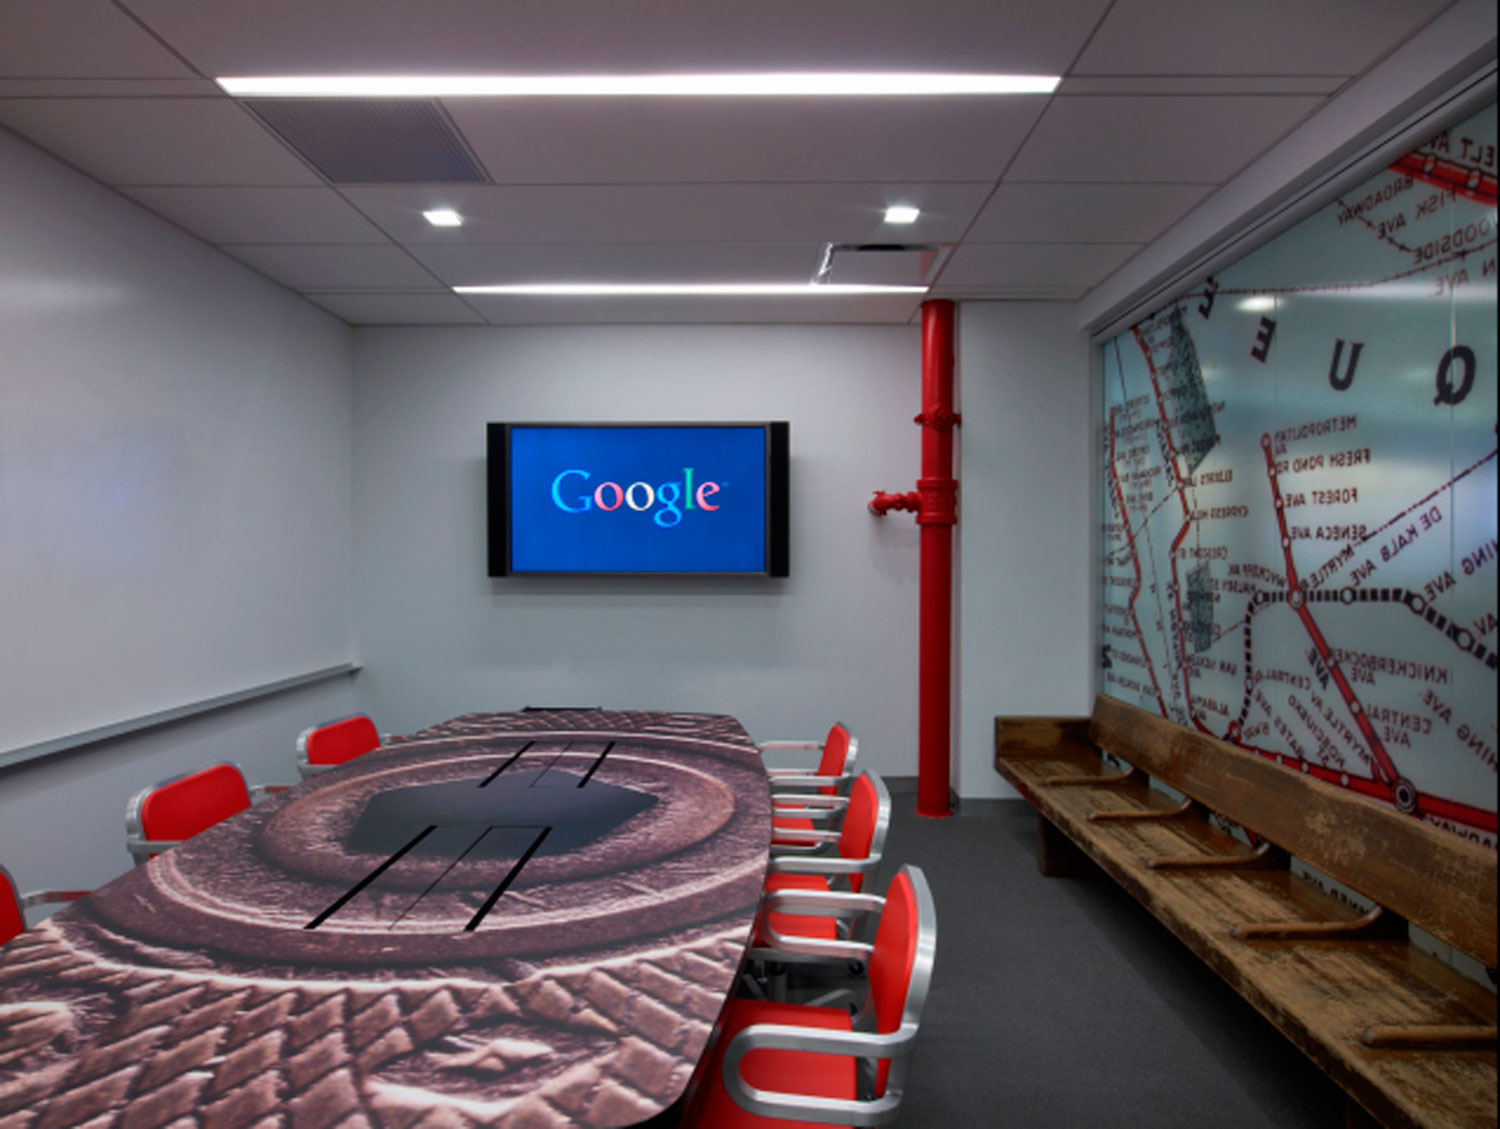 A subway themed conference room where Googlers can video conference with other Google offices around the world.